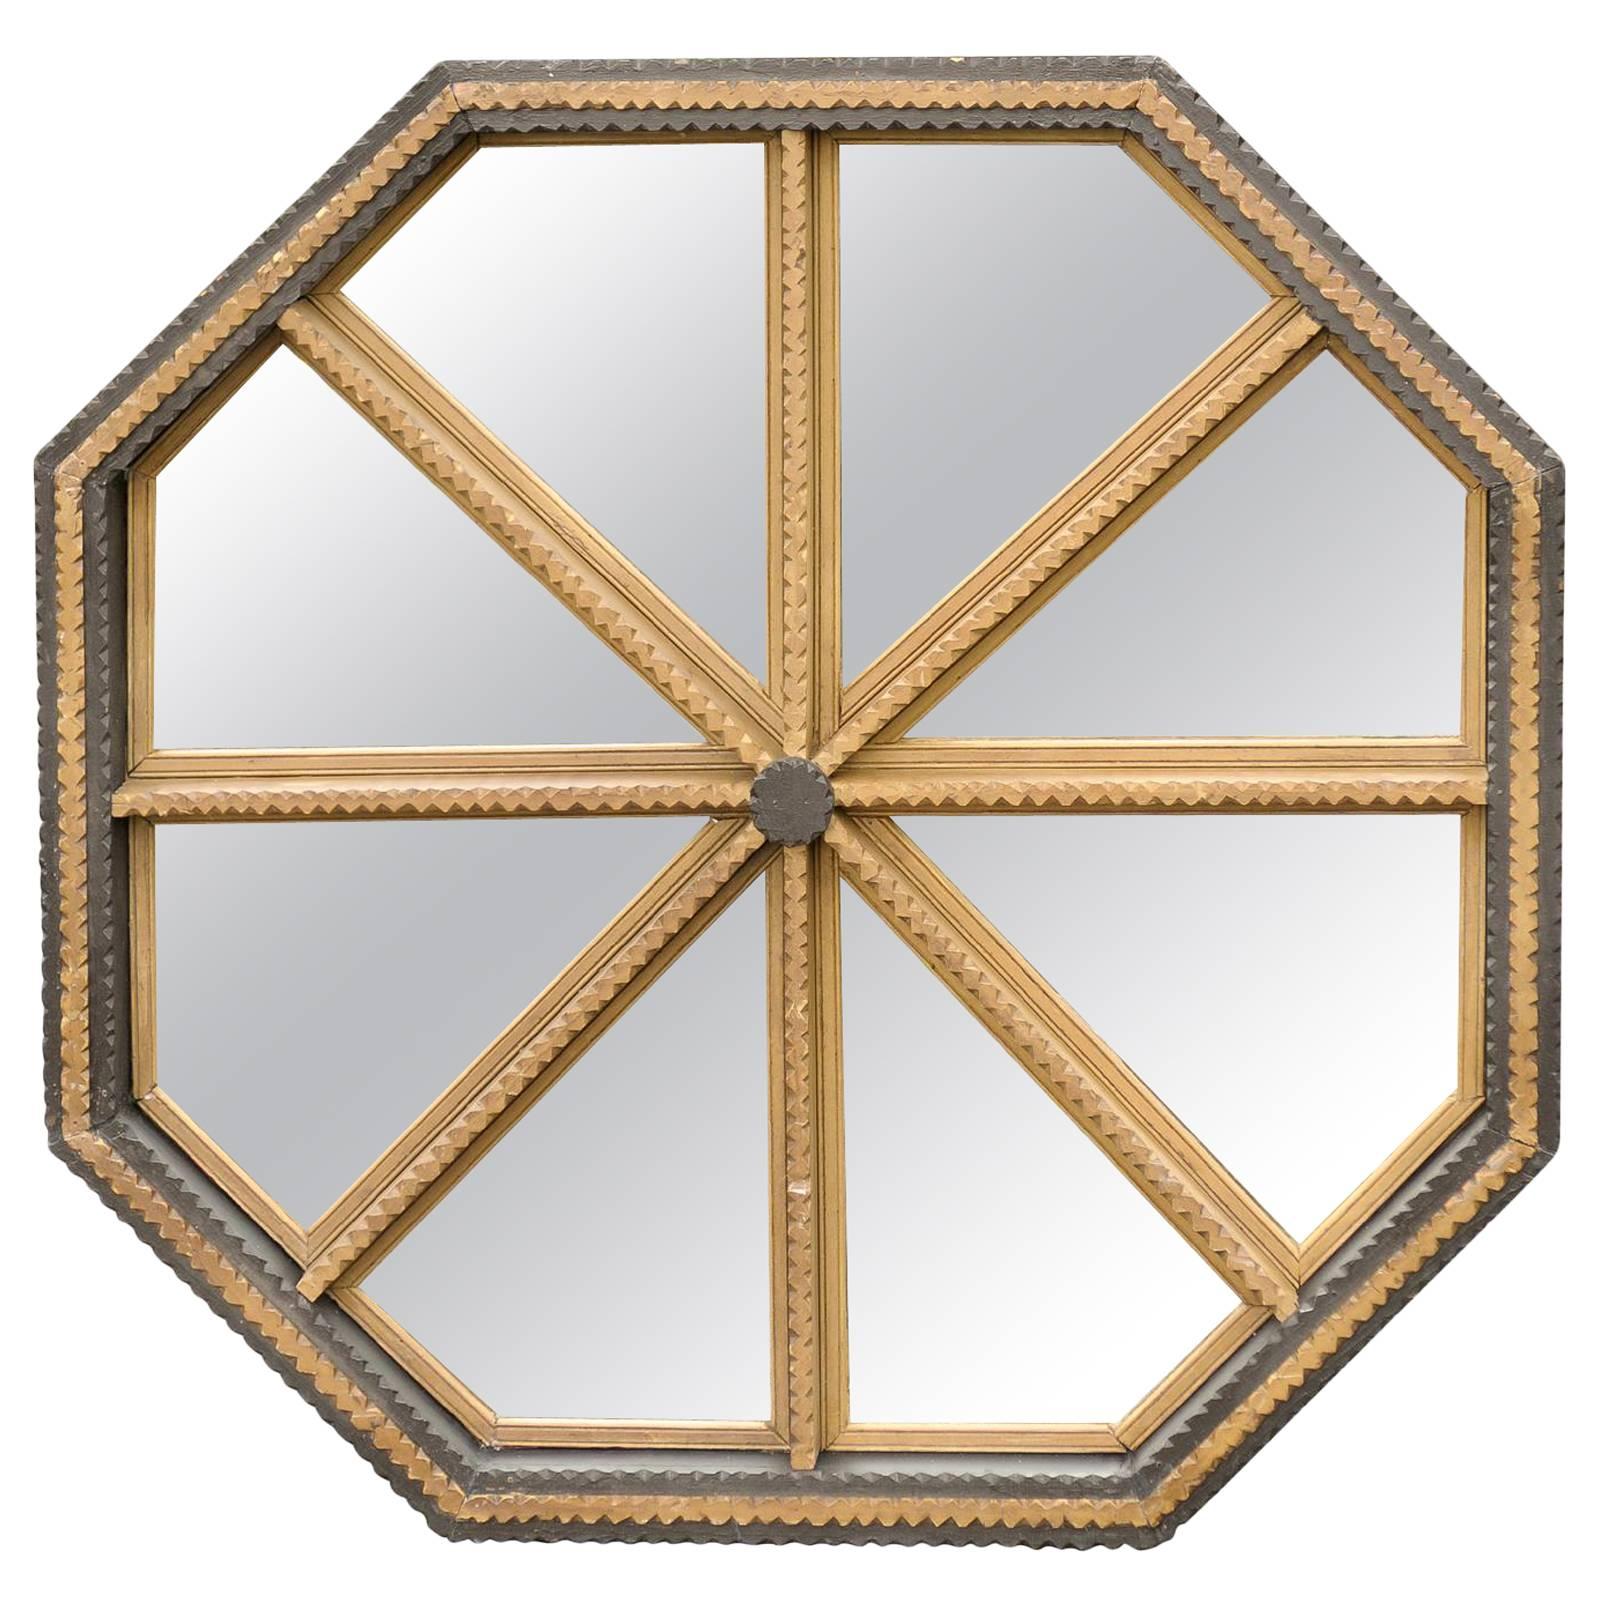 Octagonal Tramp Art Mirror Painted Black and Gold from the Mid 20th Century